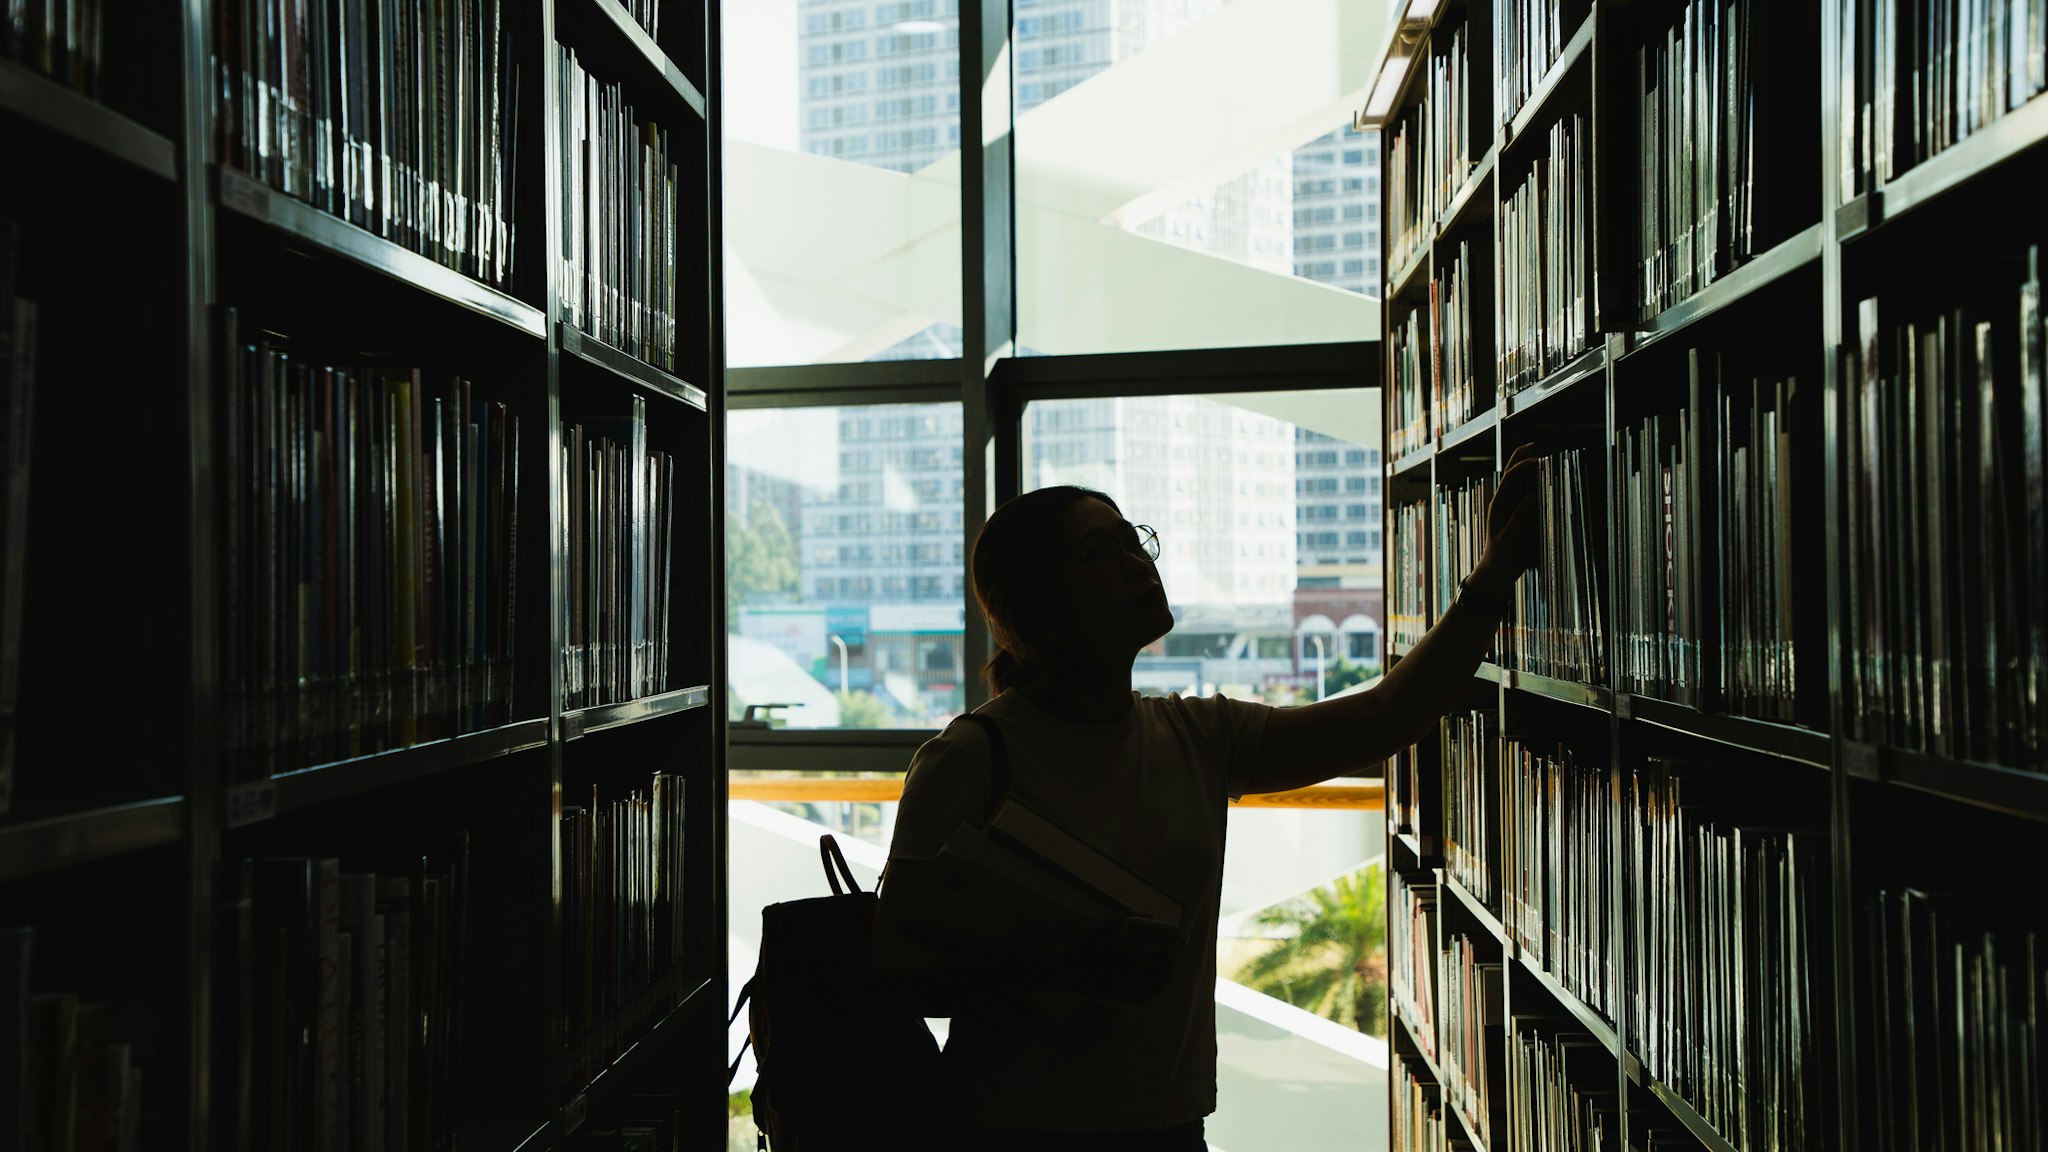 female student in silhouette looking at the books from the bookshelf - stock photo